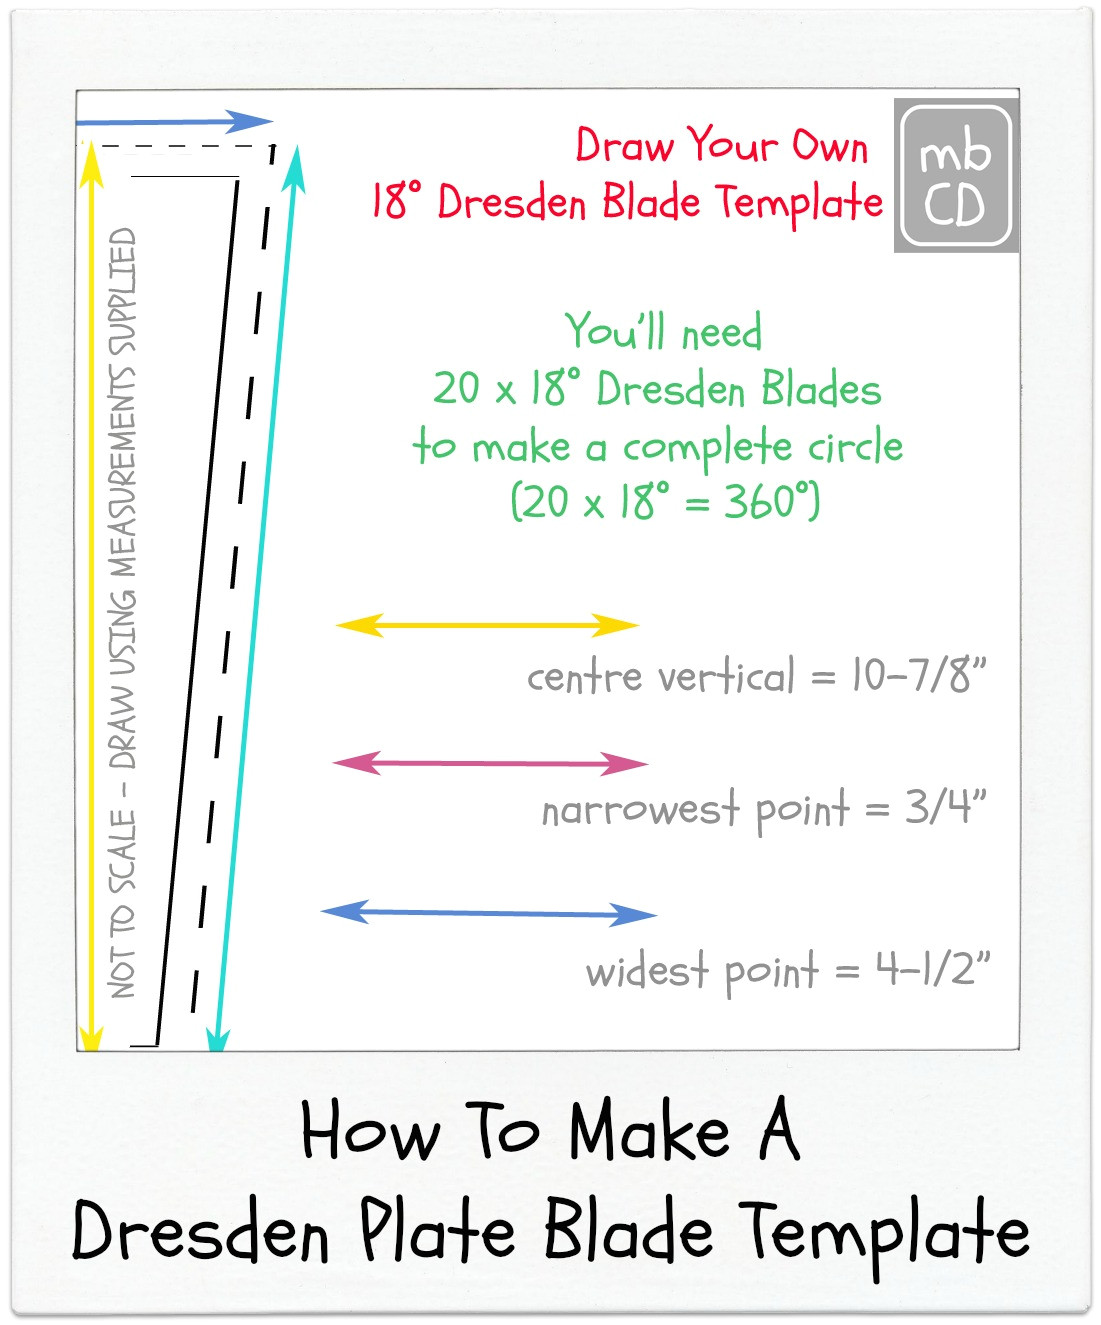 how to make a dresden plate blade template